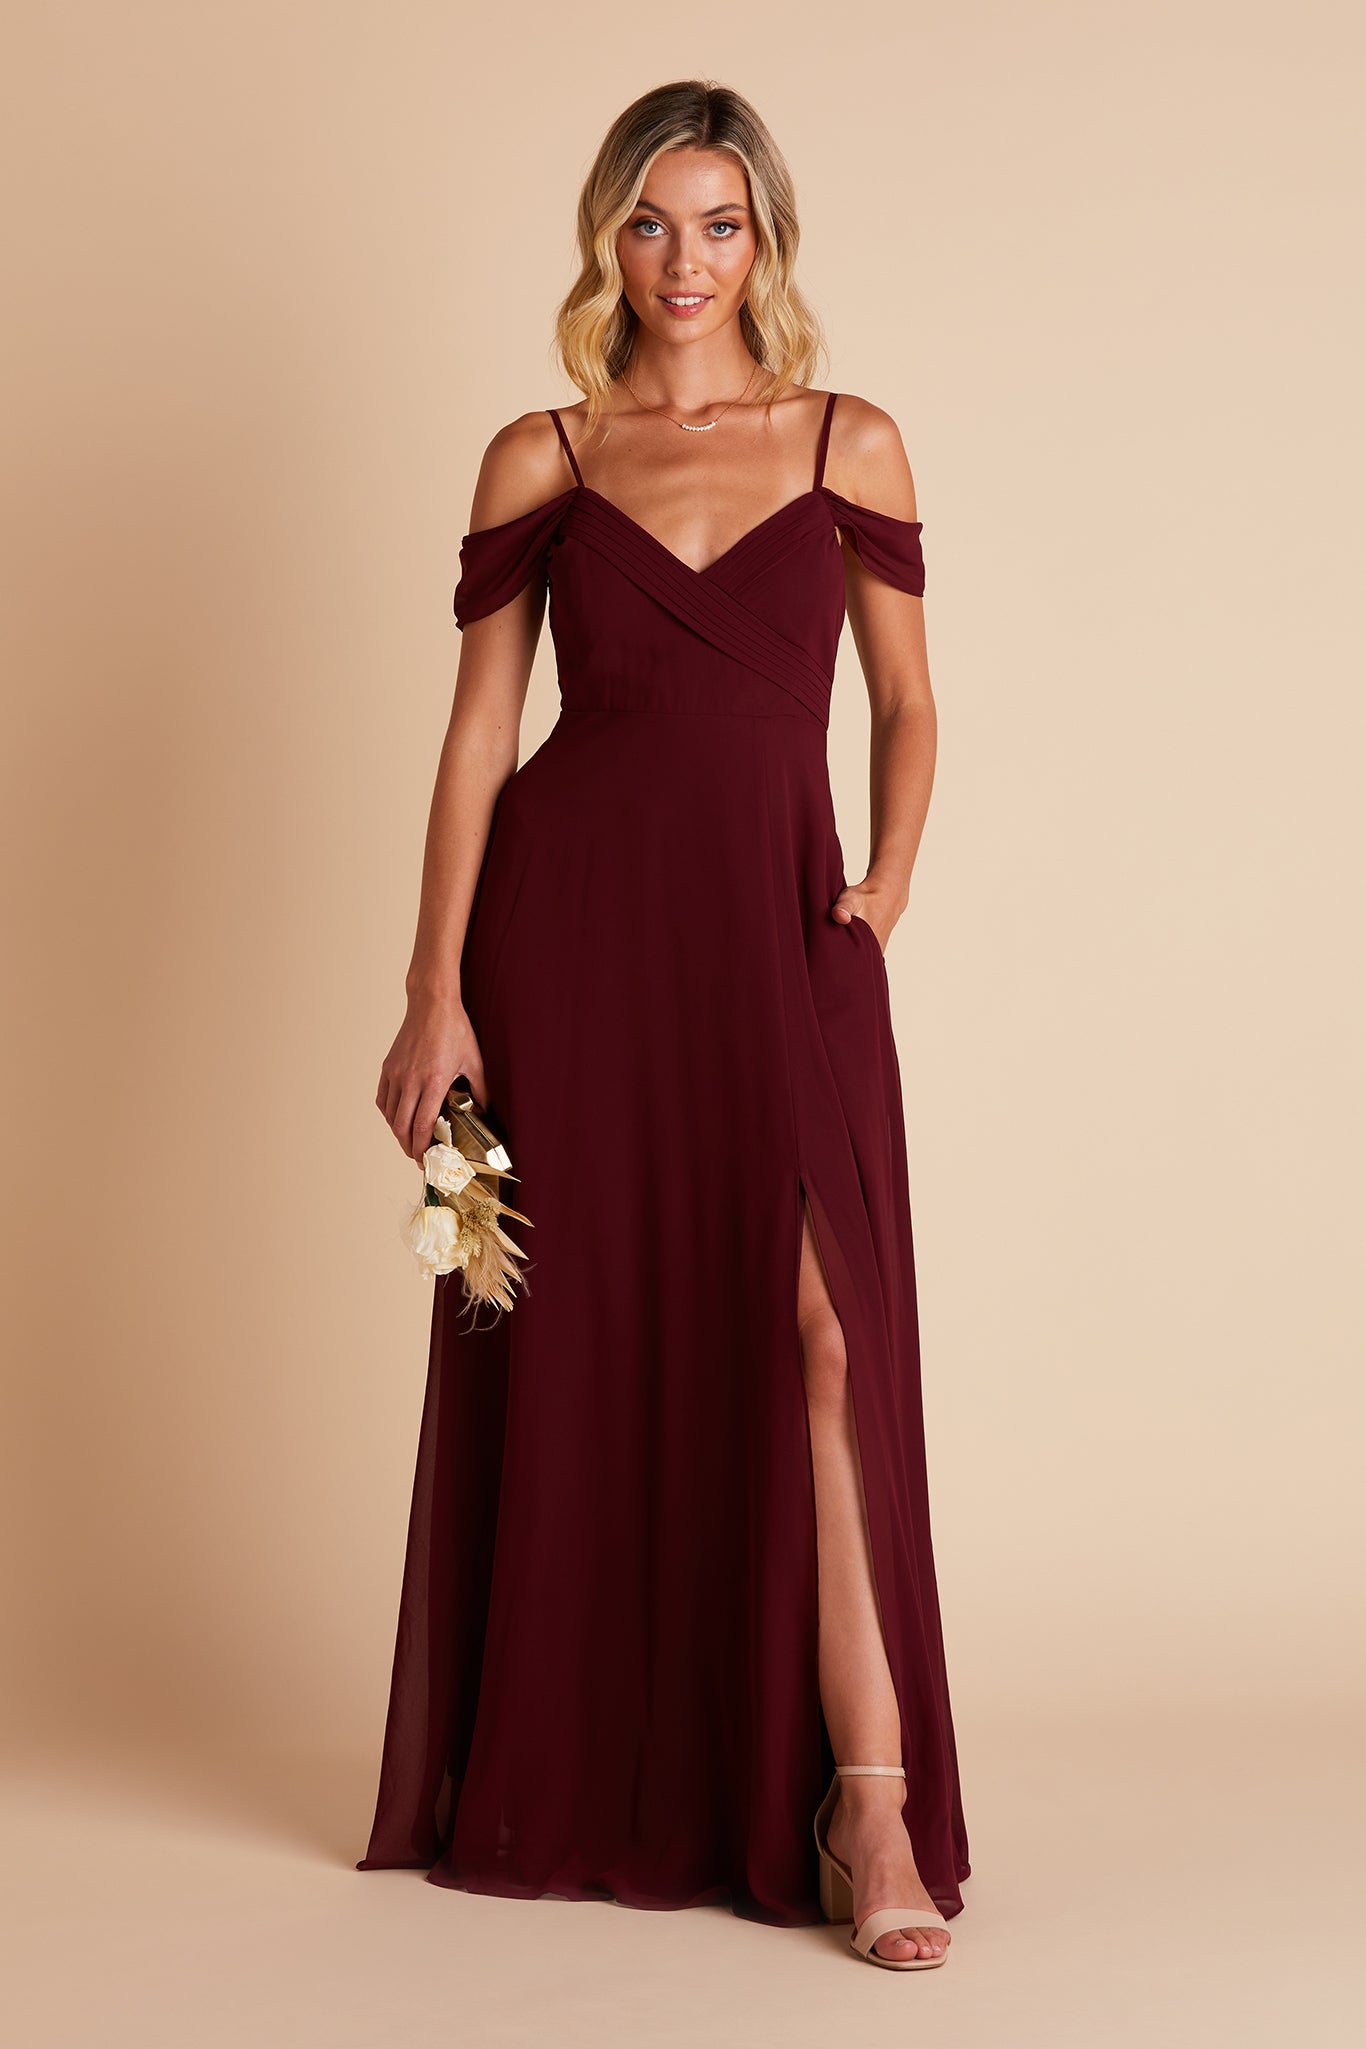 Spence convertible bridesmaid dress in cabernet burgundy chiffon with slit by Birdy Grey, front view